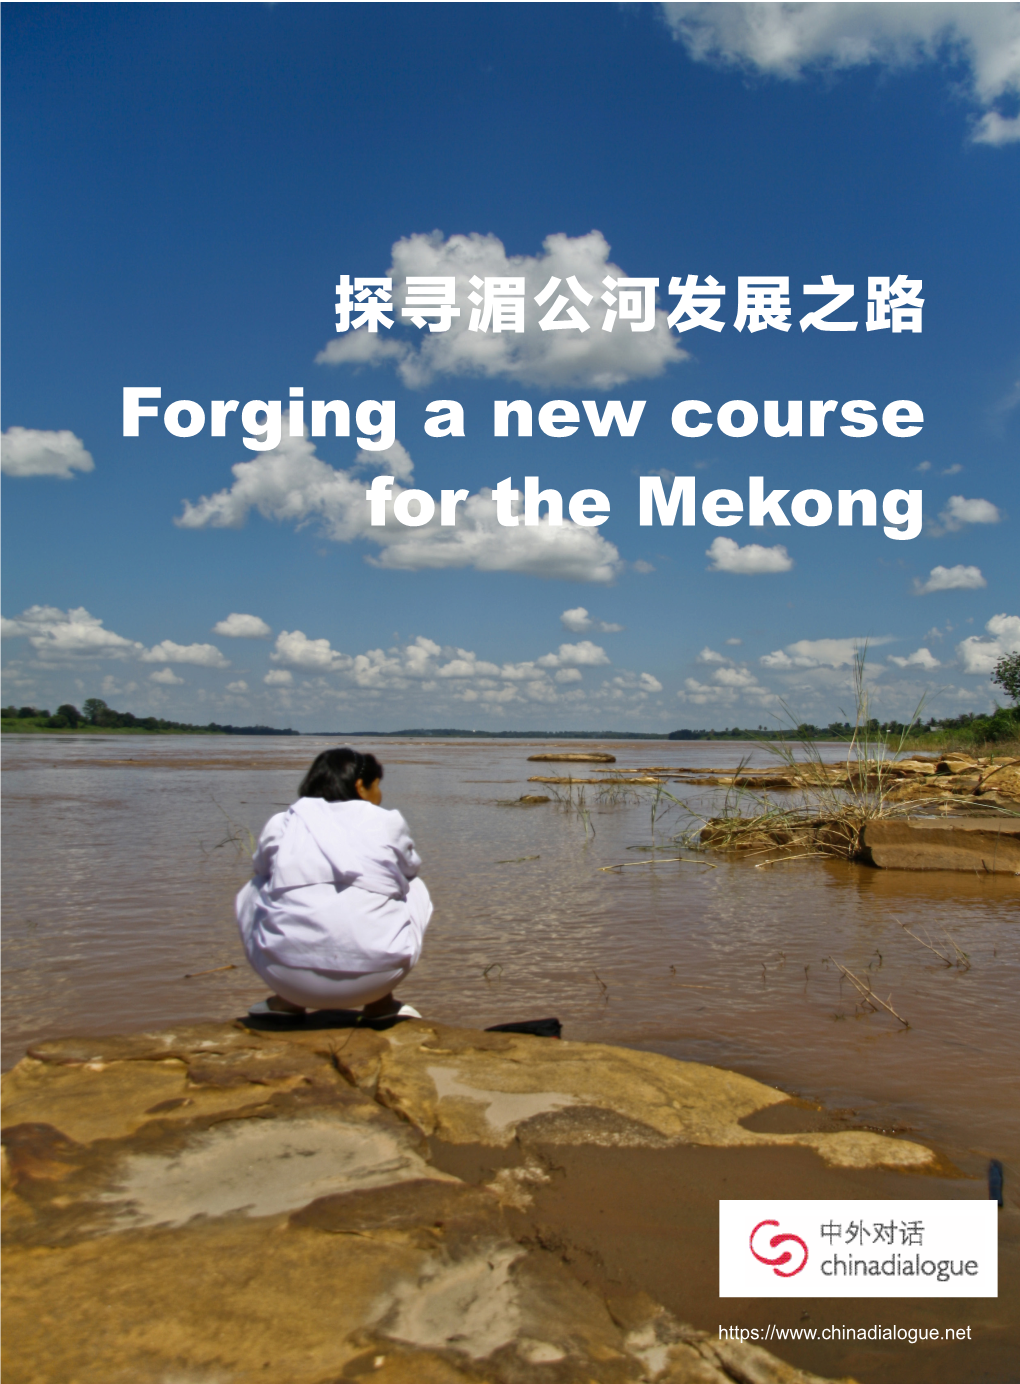 Forging a New Course for the Mekong